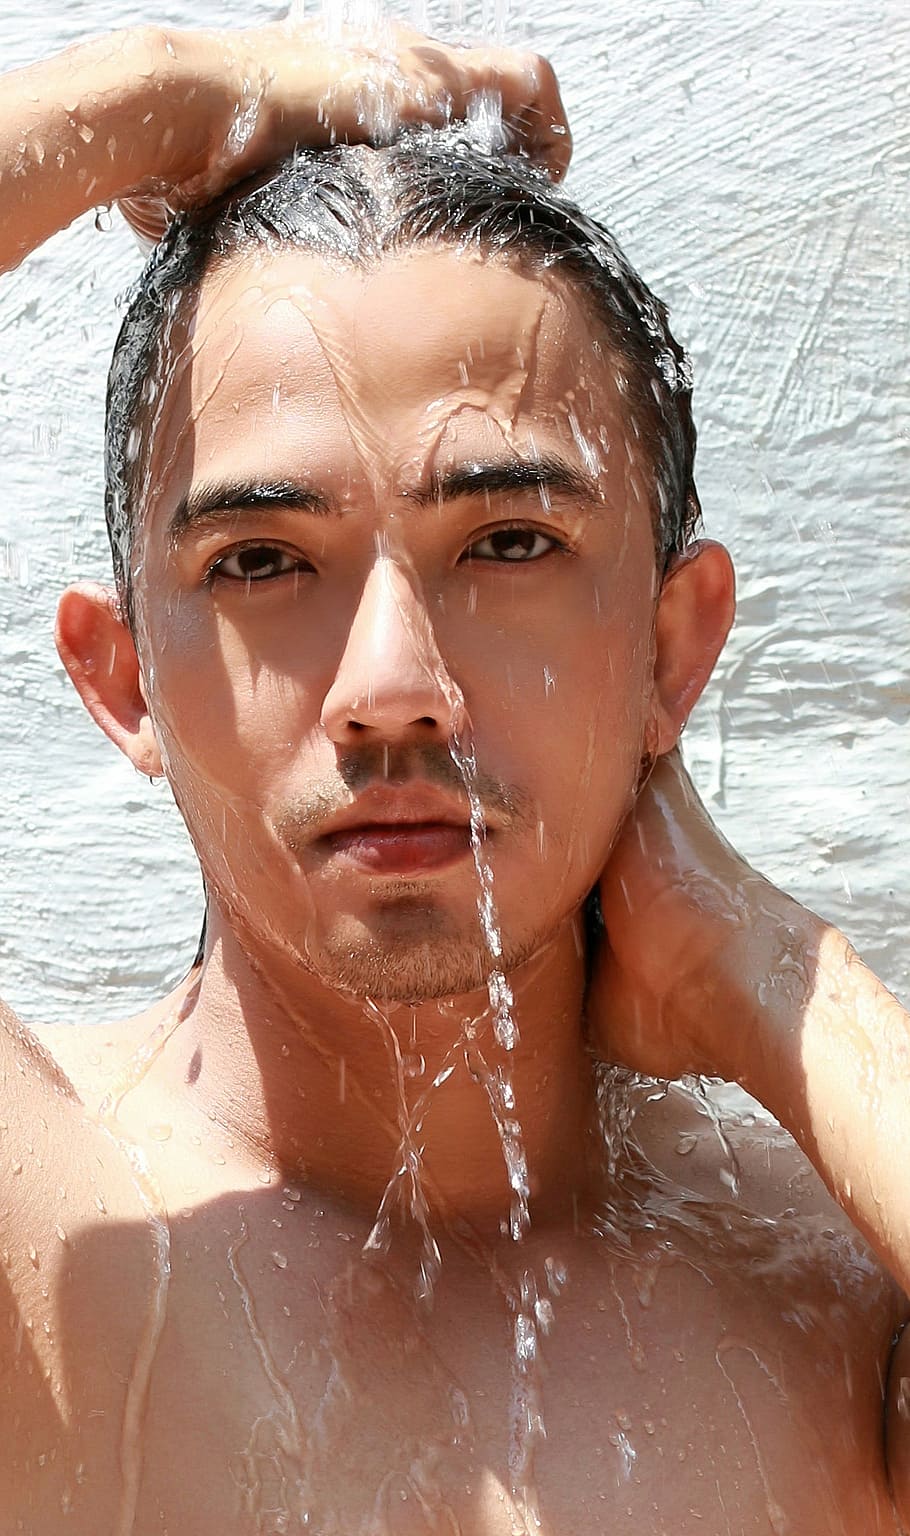 man showering near wall, face, the person, lad, wet, water, washing